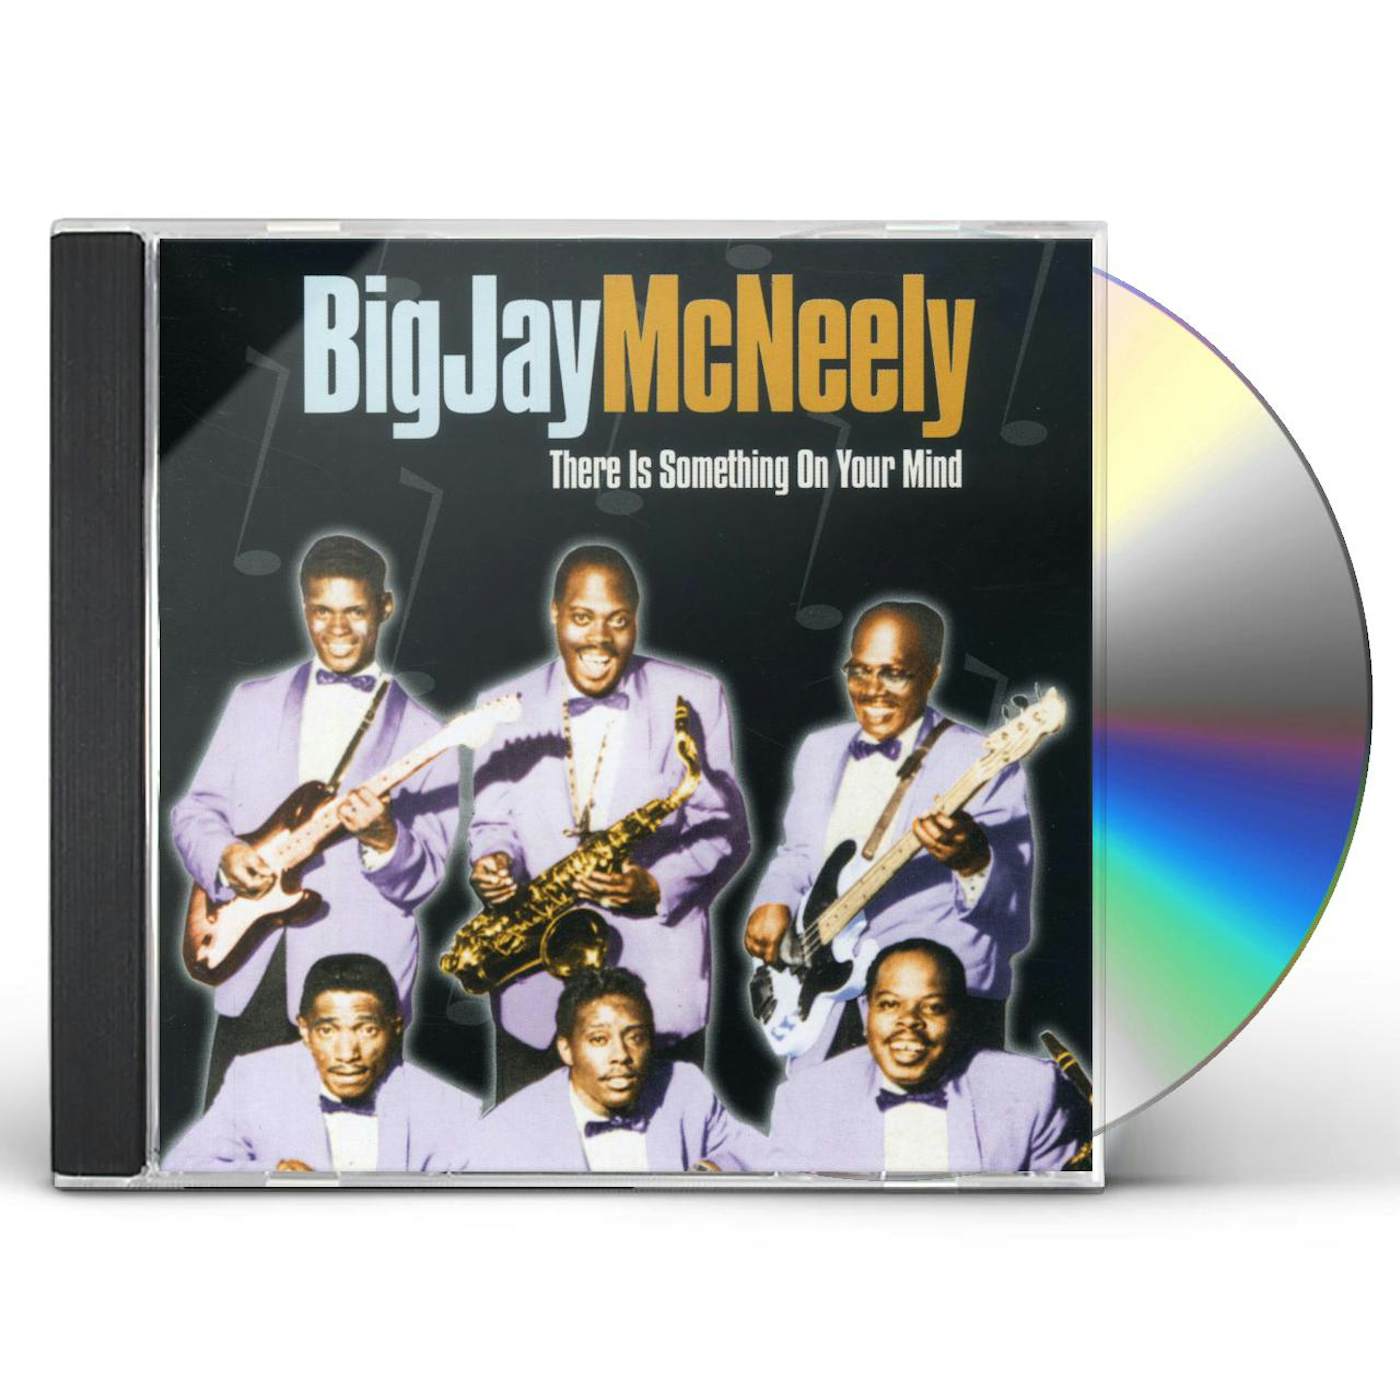 Big Jay McNeely THERE IS SOMETHING ON YOUR MIND CD